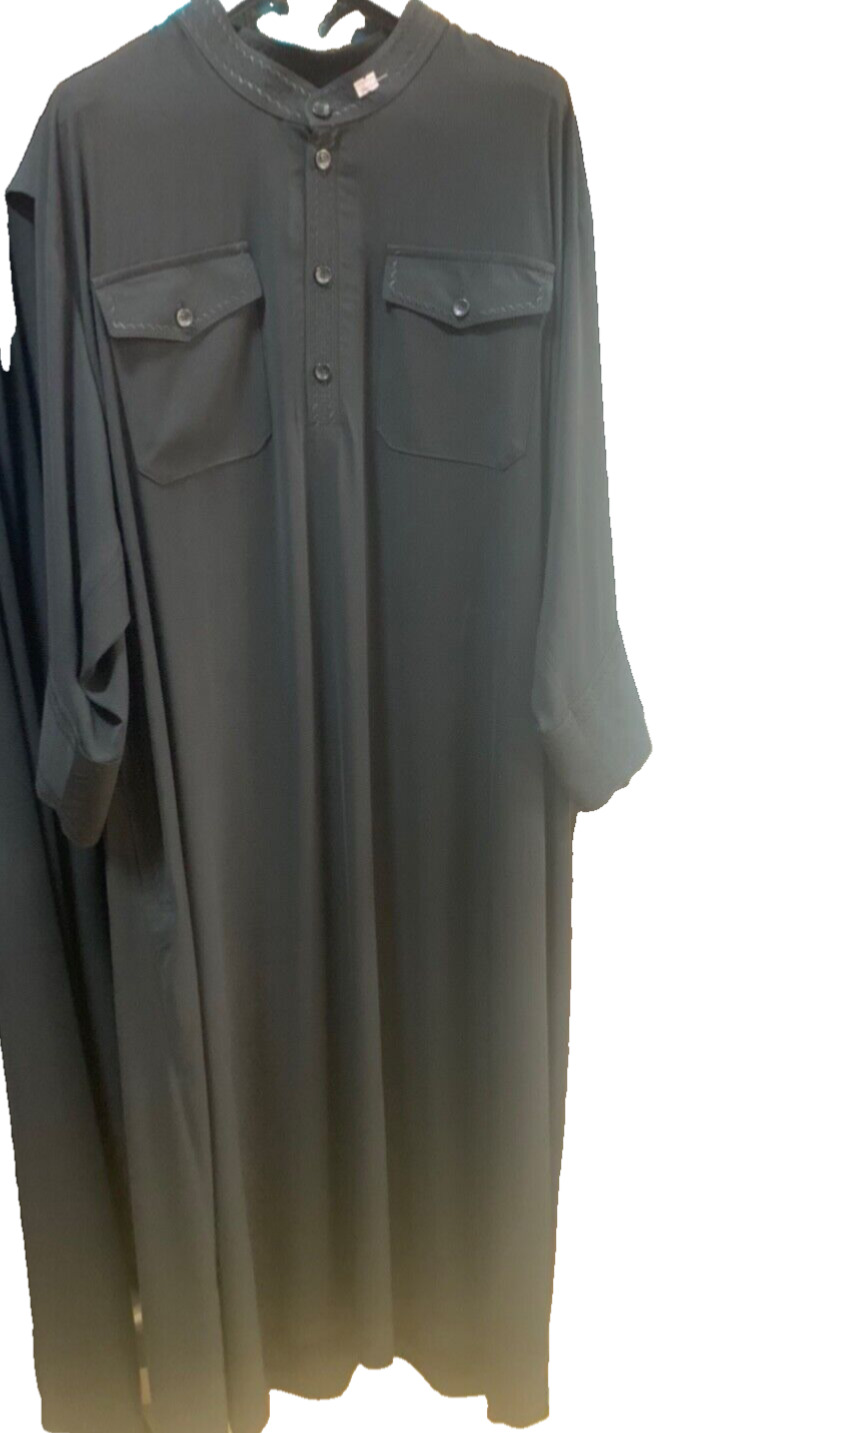 Orthodox priest monk clergy cassock with pockets Christian church